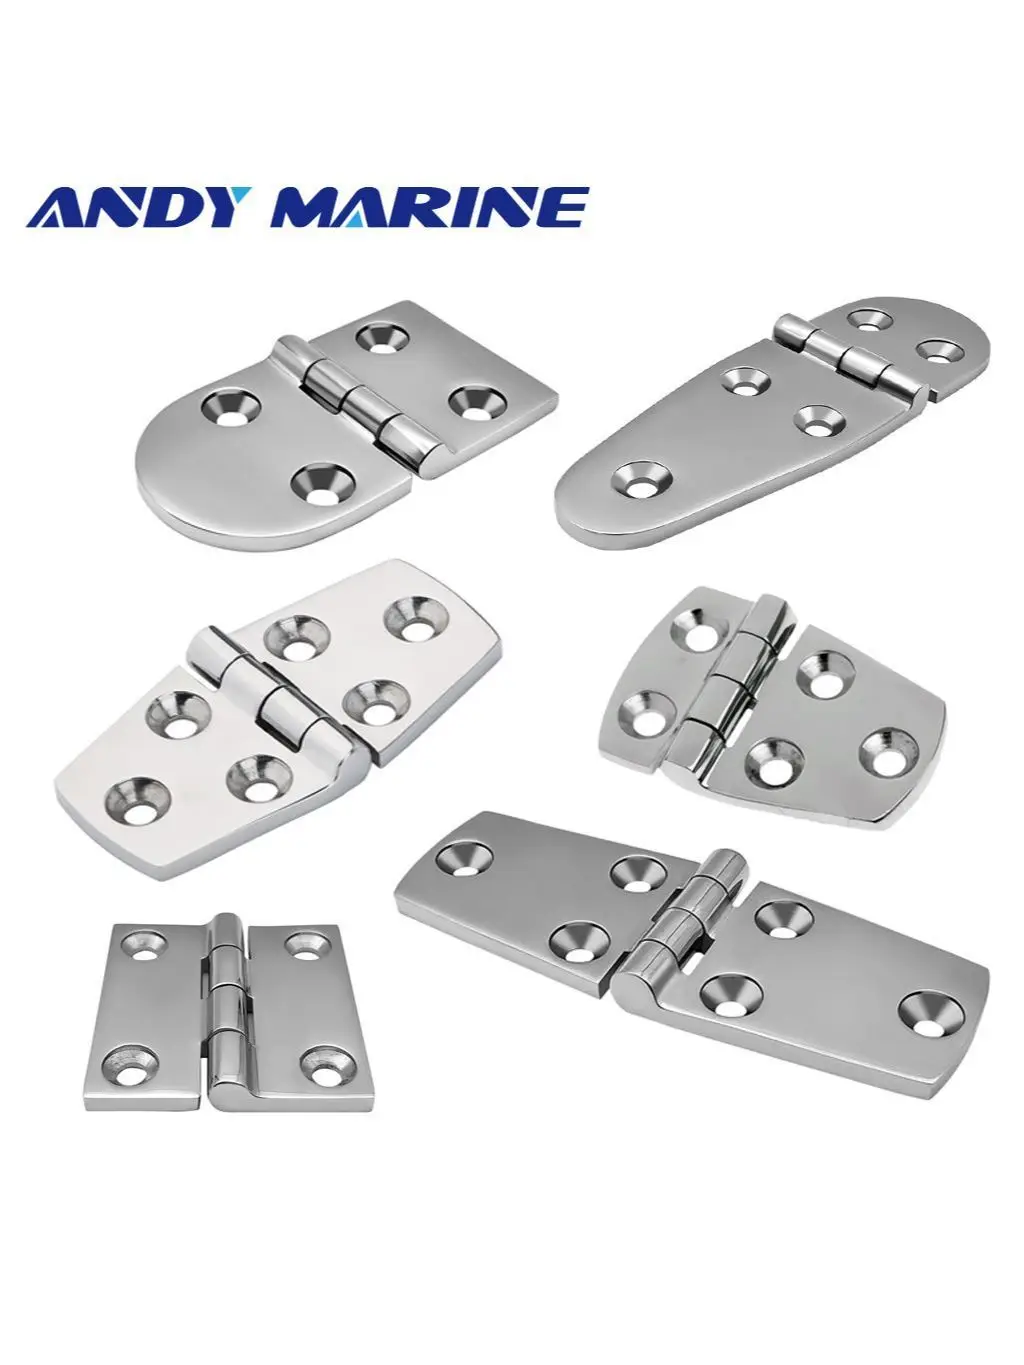 Andymarine Heavy Stainless Steel Casting Hinge Flat Hinge Cabinet Doors For Windows Hinge Wooden Box Hinge Thickness 100pcs steel flat pad insulation washers red paper gasket m11 m11 5 insulation washer thickness 0 5 0 7 0 8mm